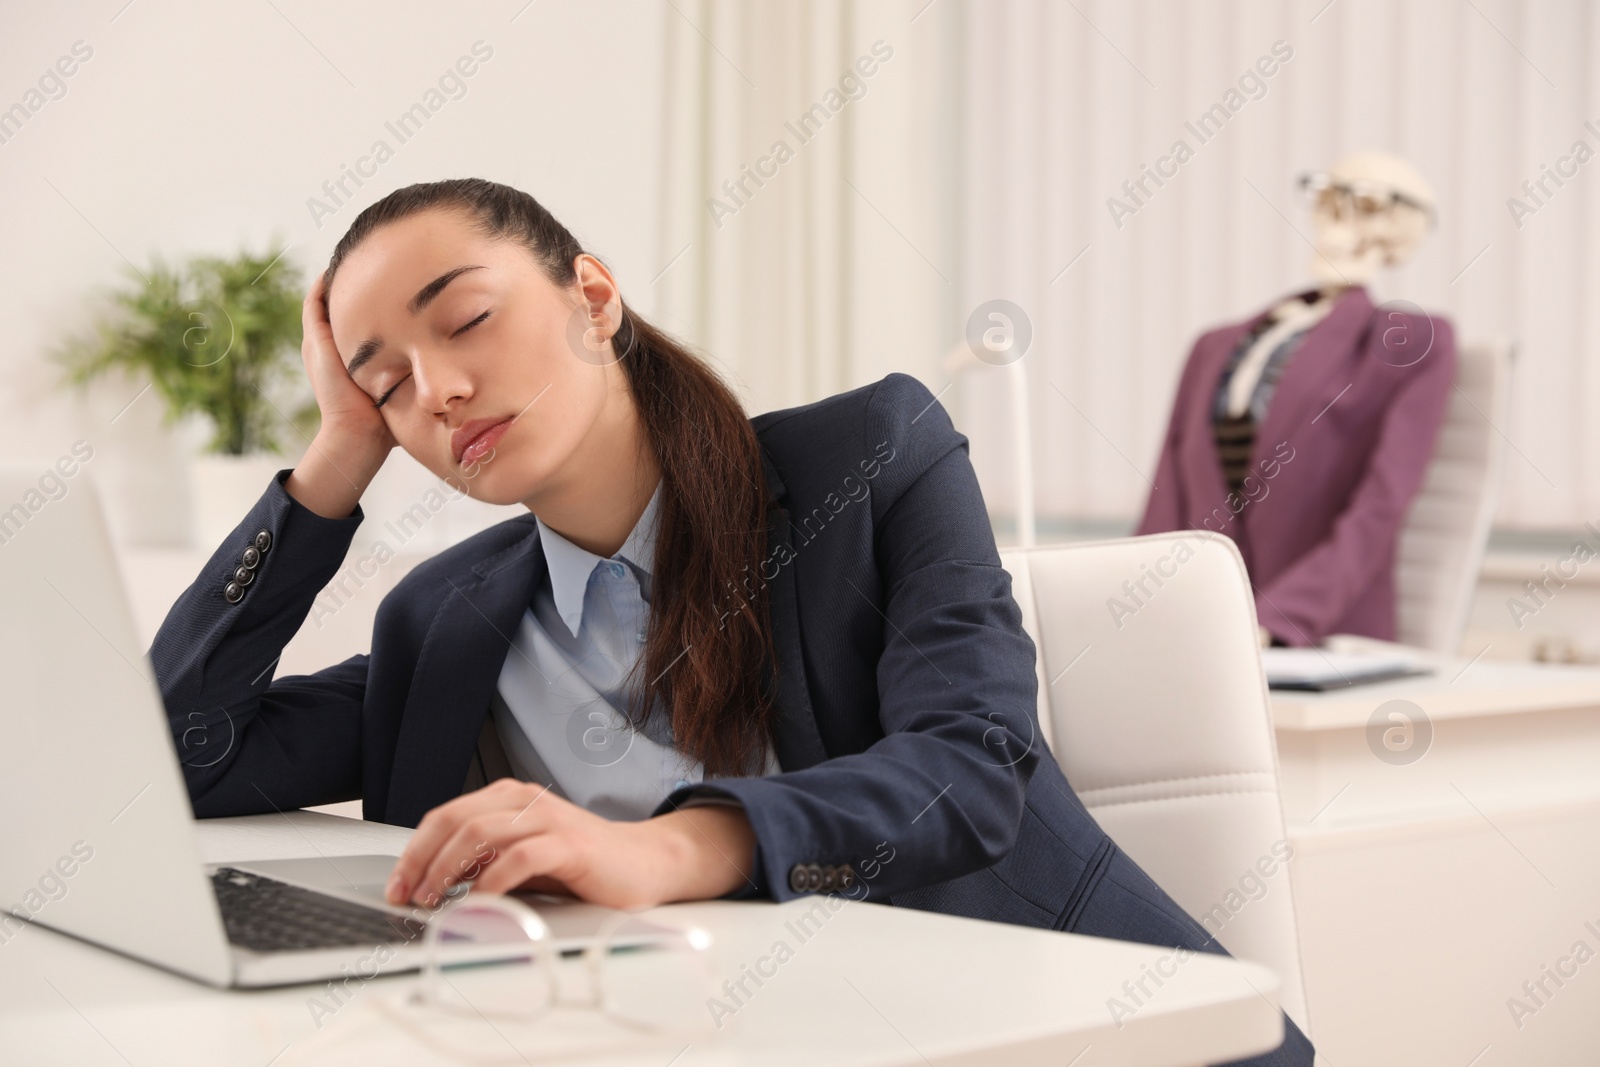 Photo of Young woman sleeping at table and human skeleton on background